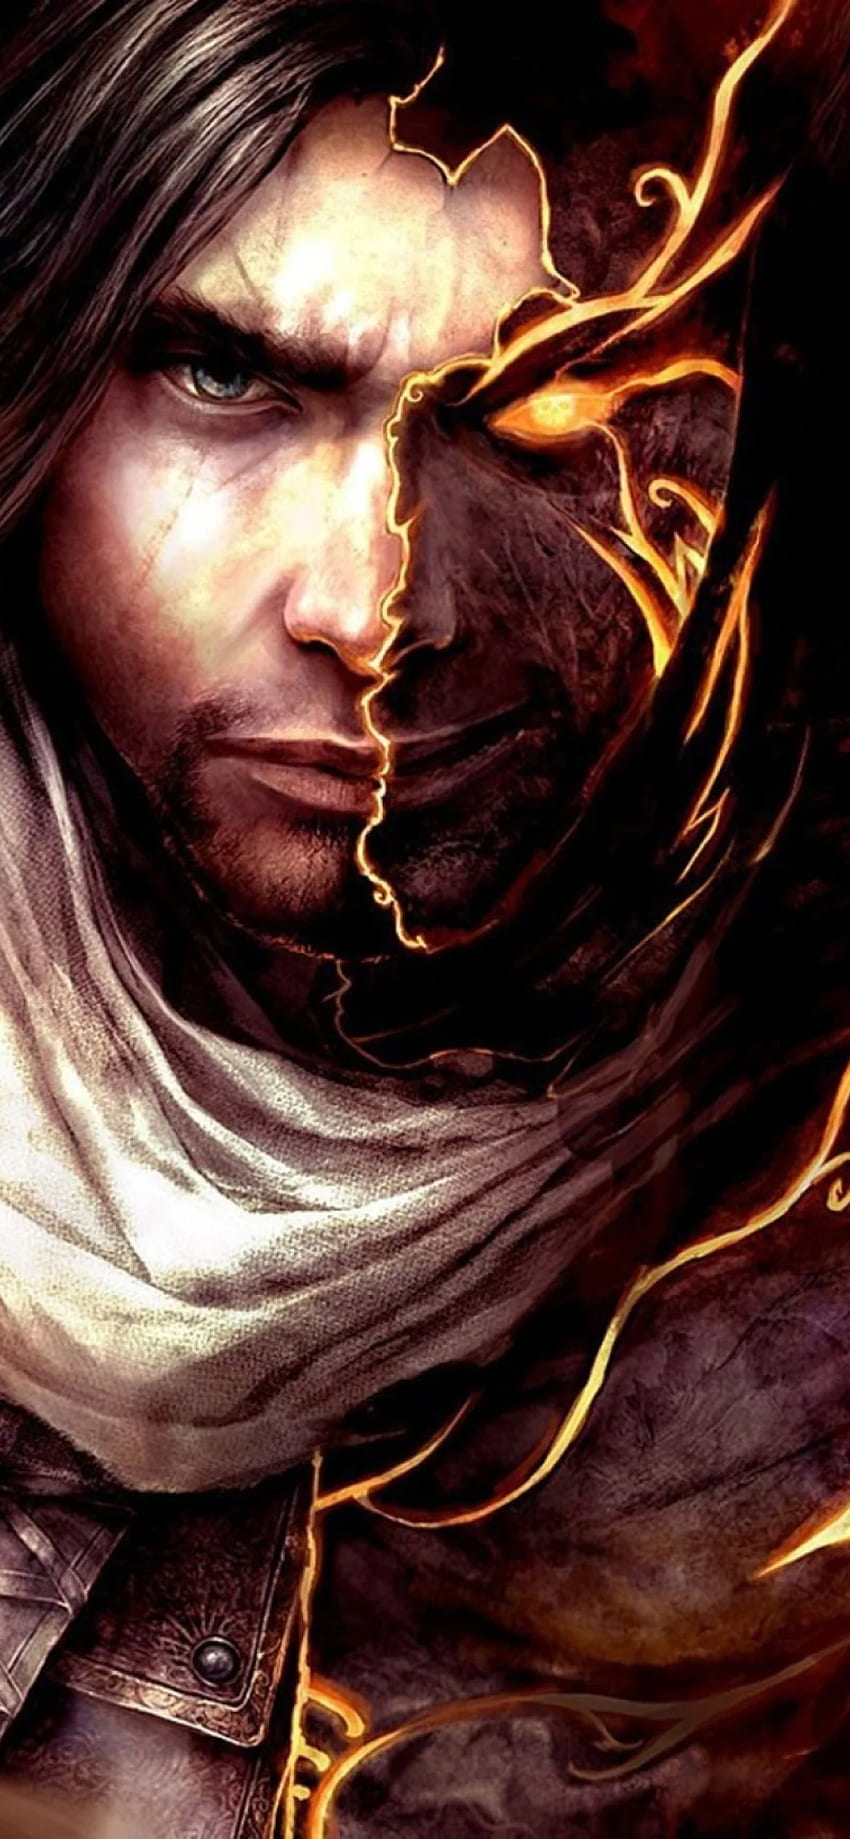 Prince Of Persia - The Two Thrones สำหรับ iPhone 11, Prince of Persia iPhone วอลล์เปเปอร์โทรศัพท์ HD